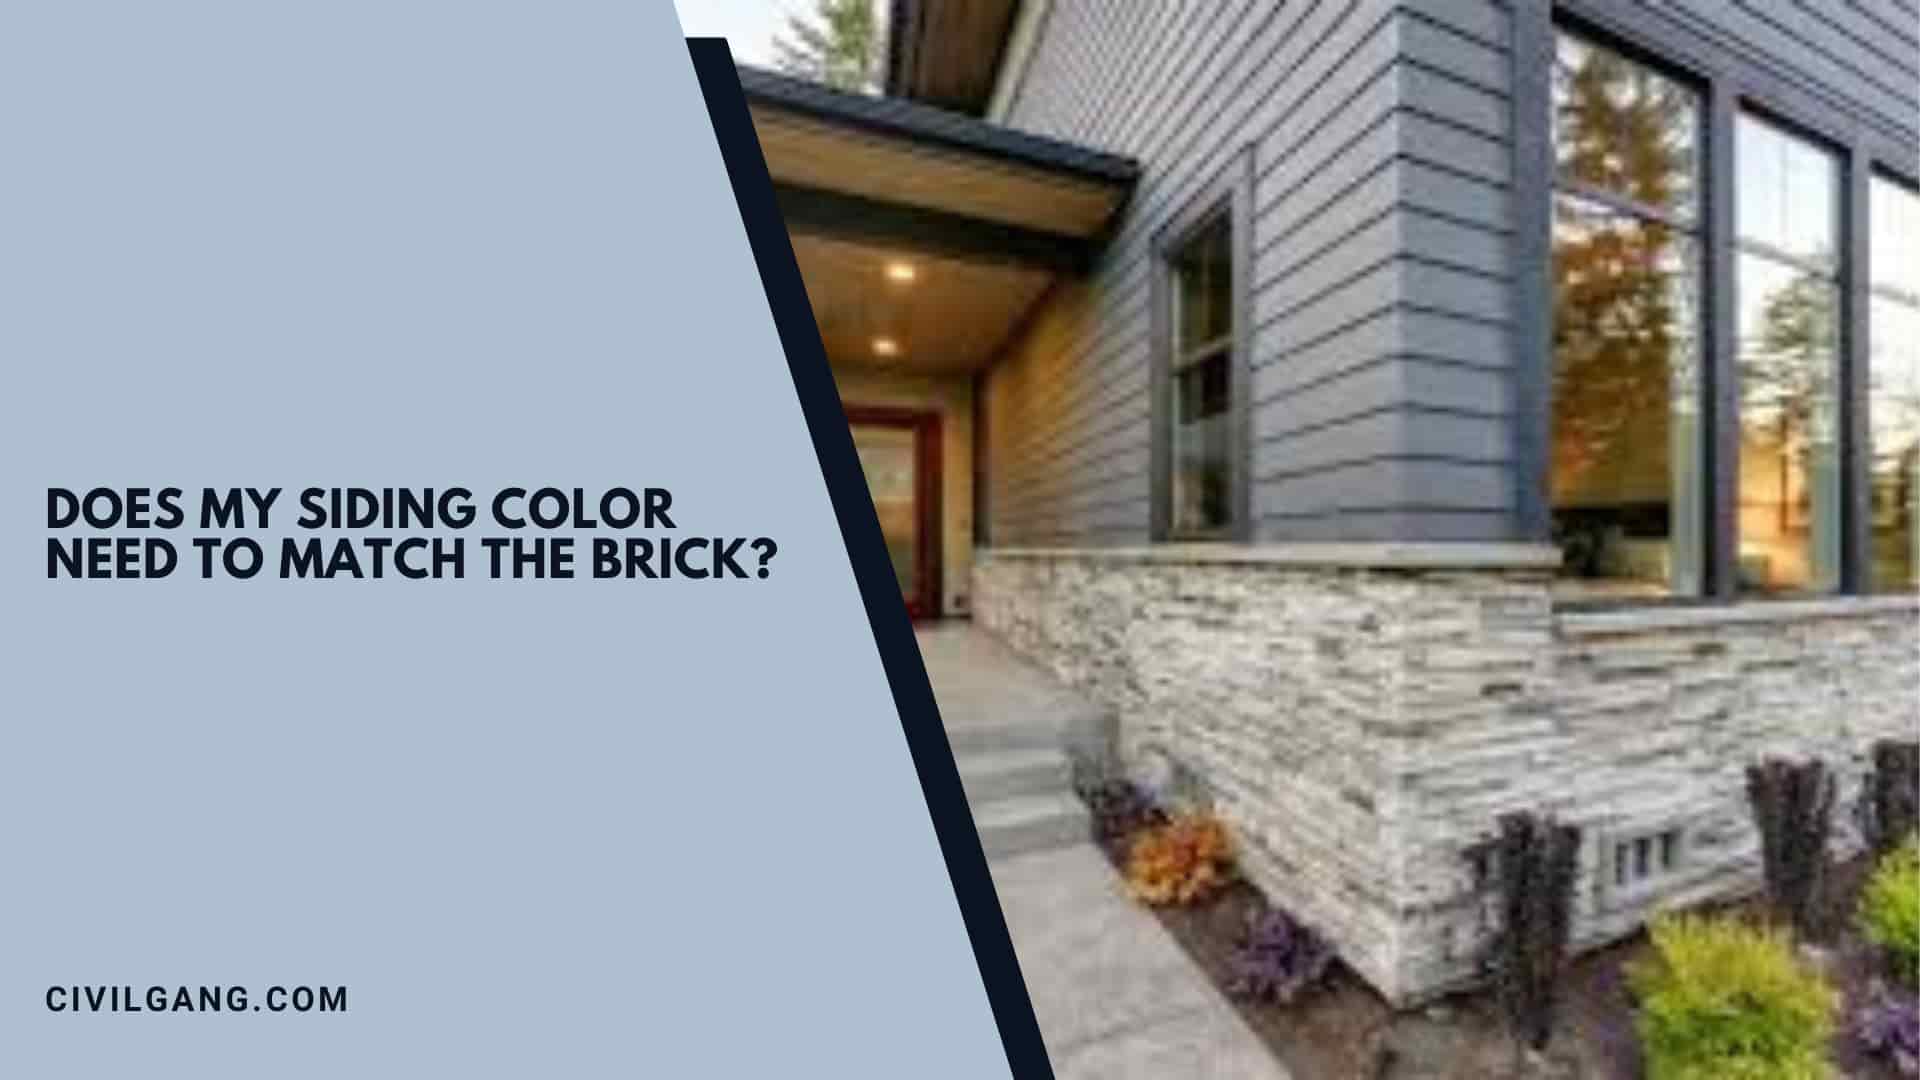 Does My Siding Color Need to Match the Brick?